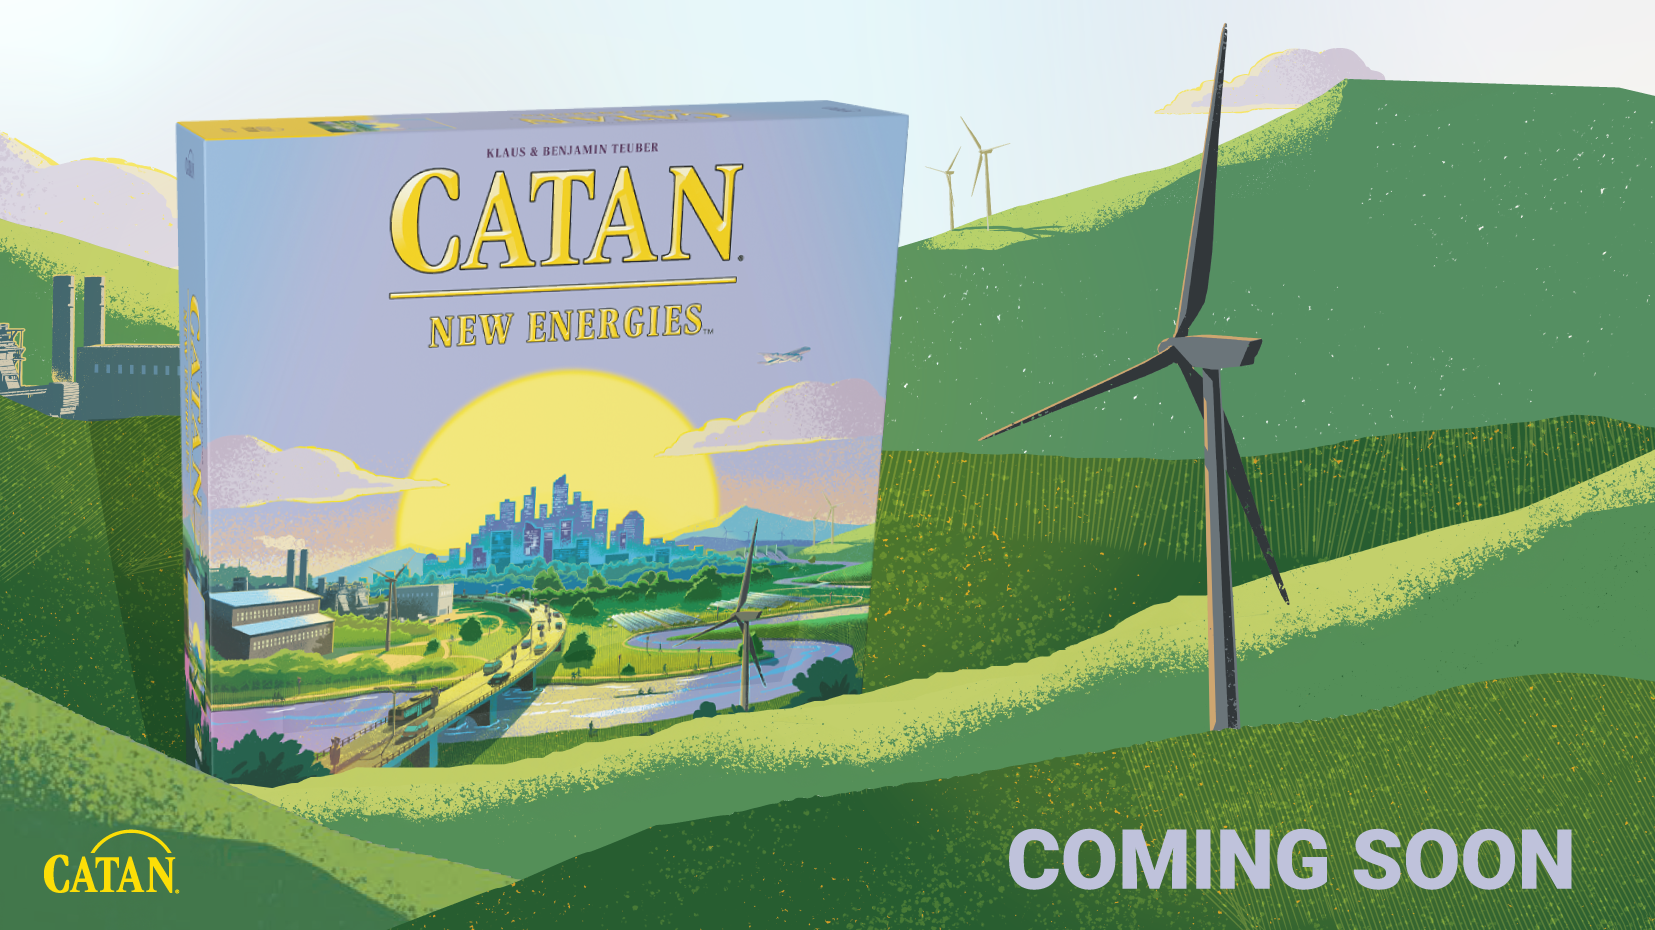 CATAN New Energies Coming Soon Announcement